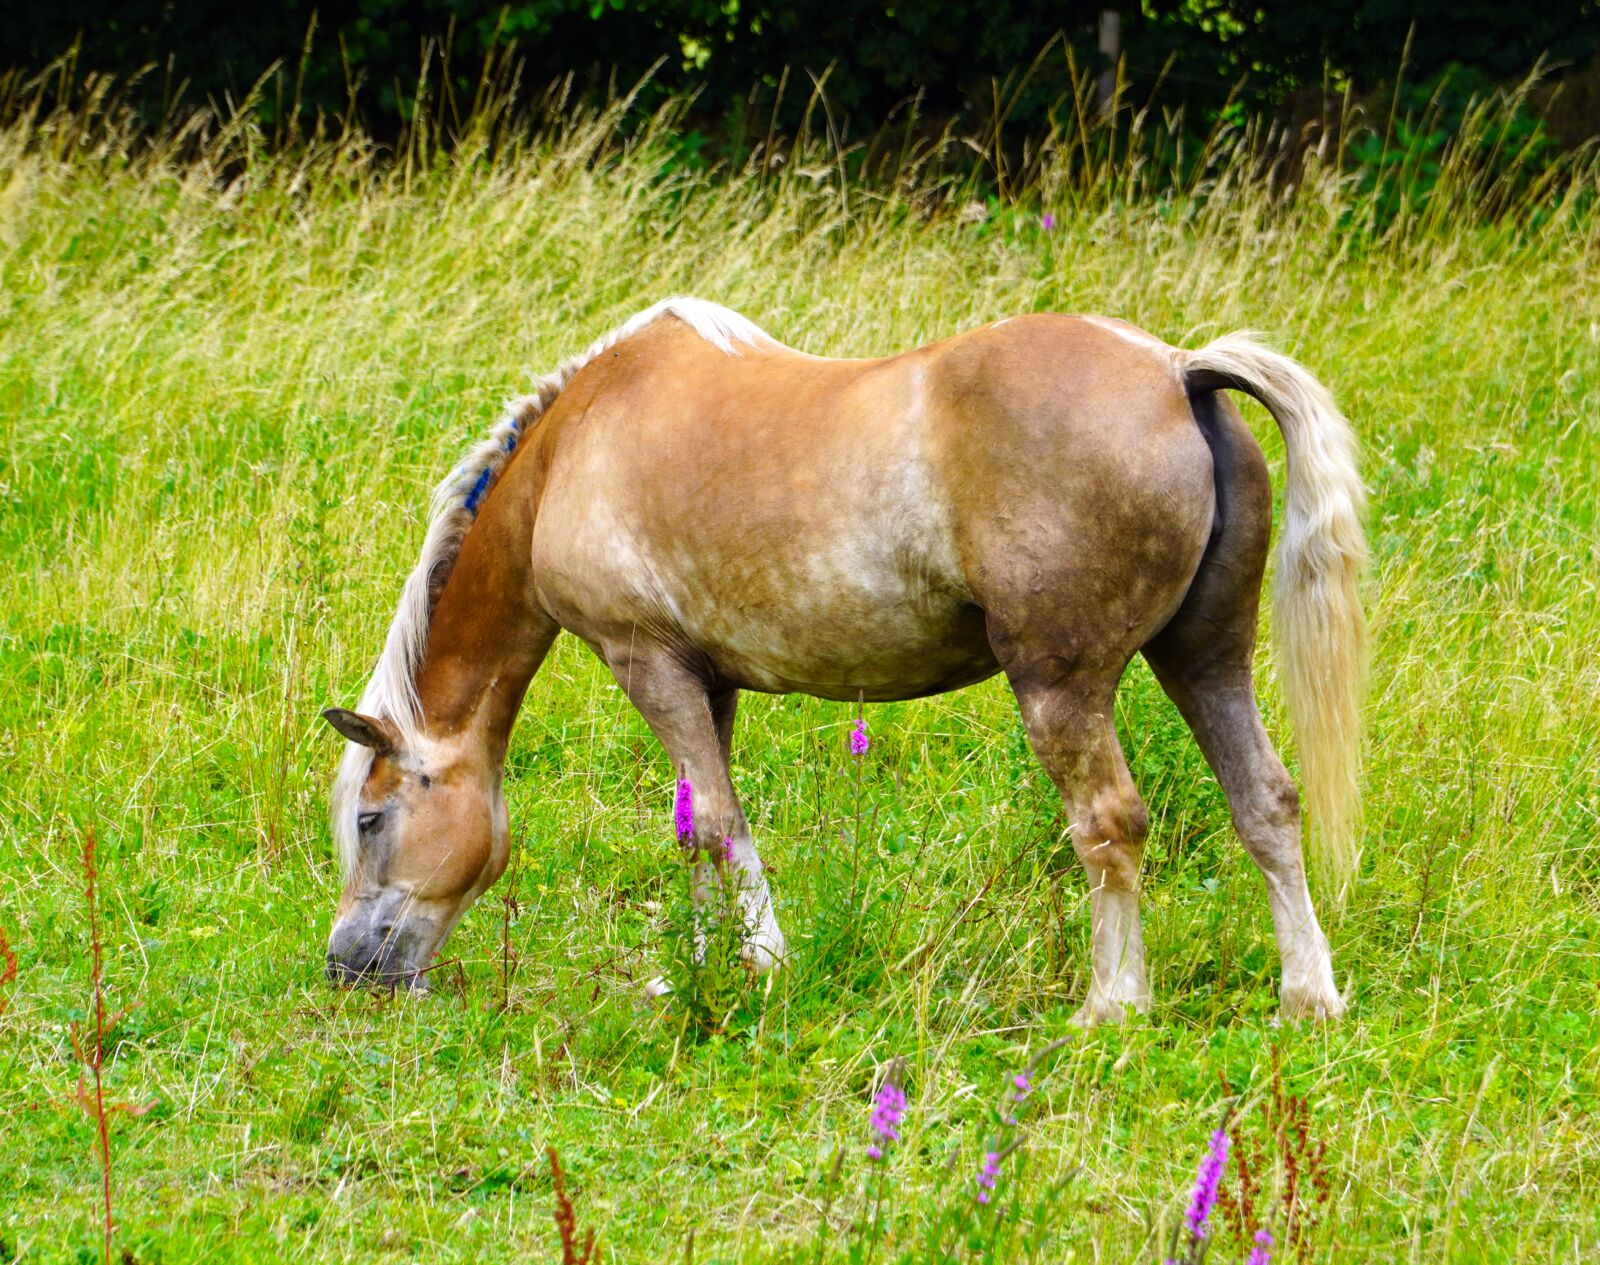 Sony E PZ 18-105mm F4 G OSS sample photo. Horse, meadow, animal photography